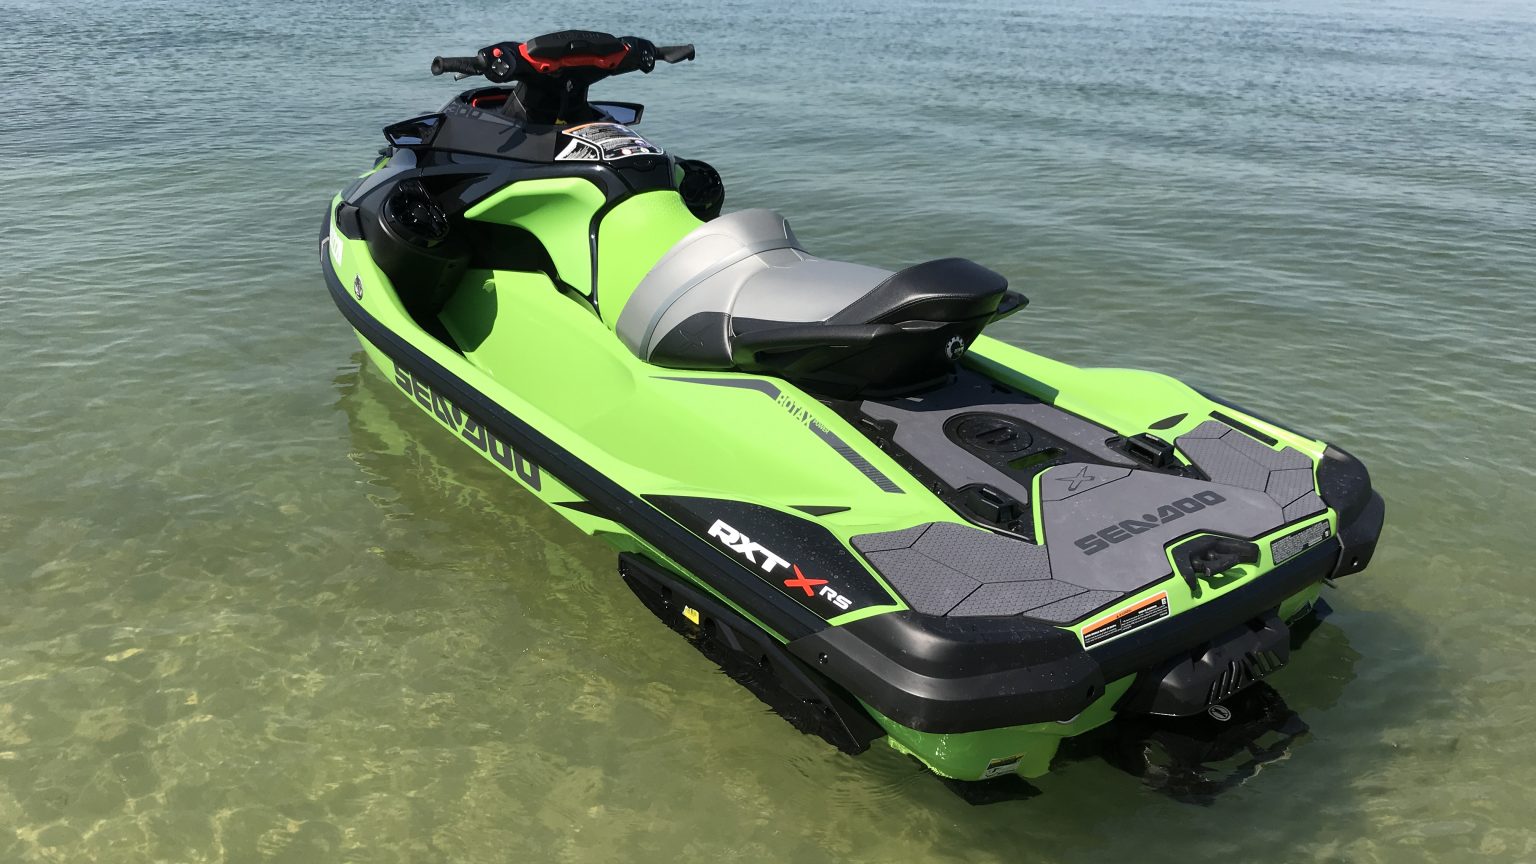 2020 SeaDoo RXTX RS 300 Review, price and specs